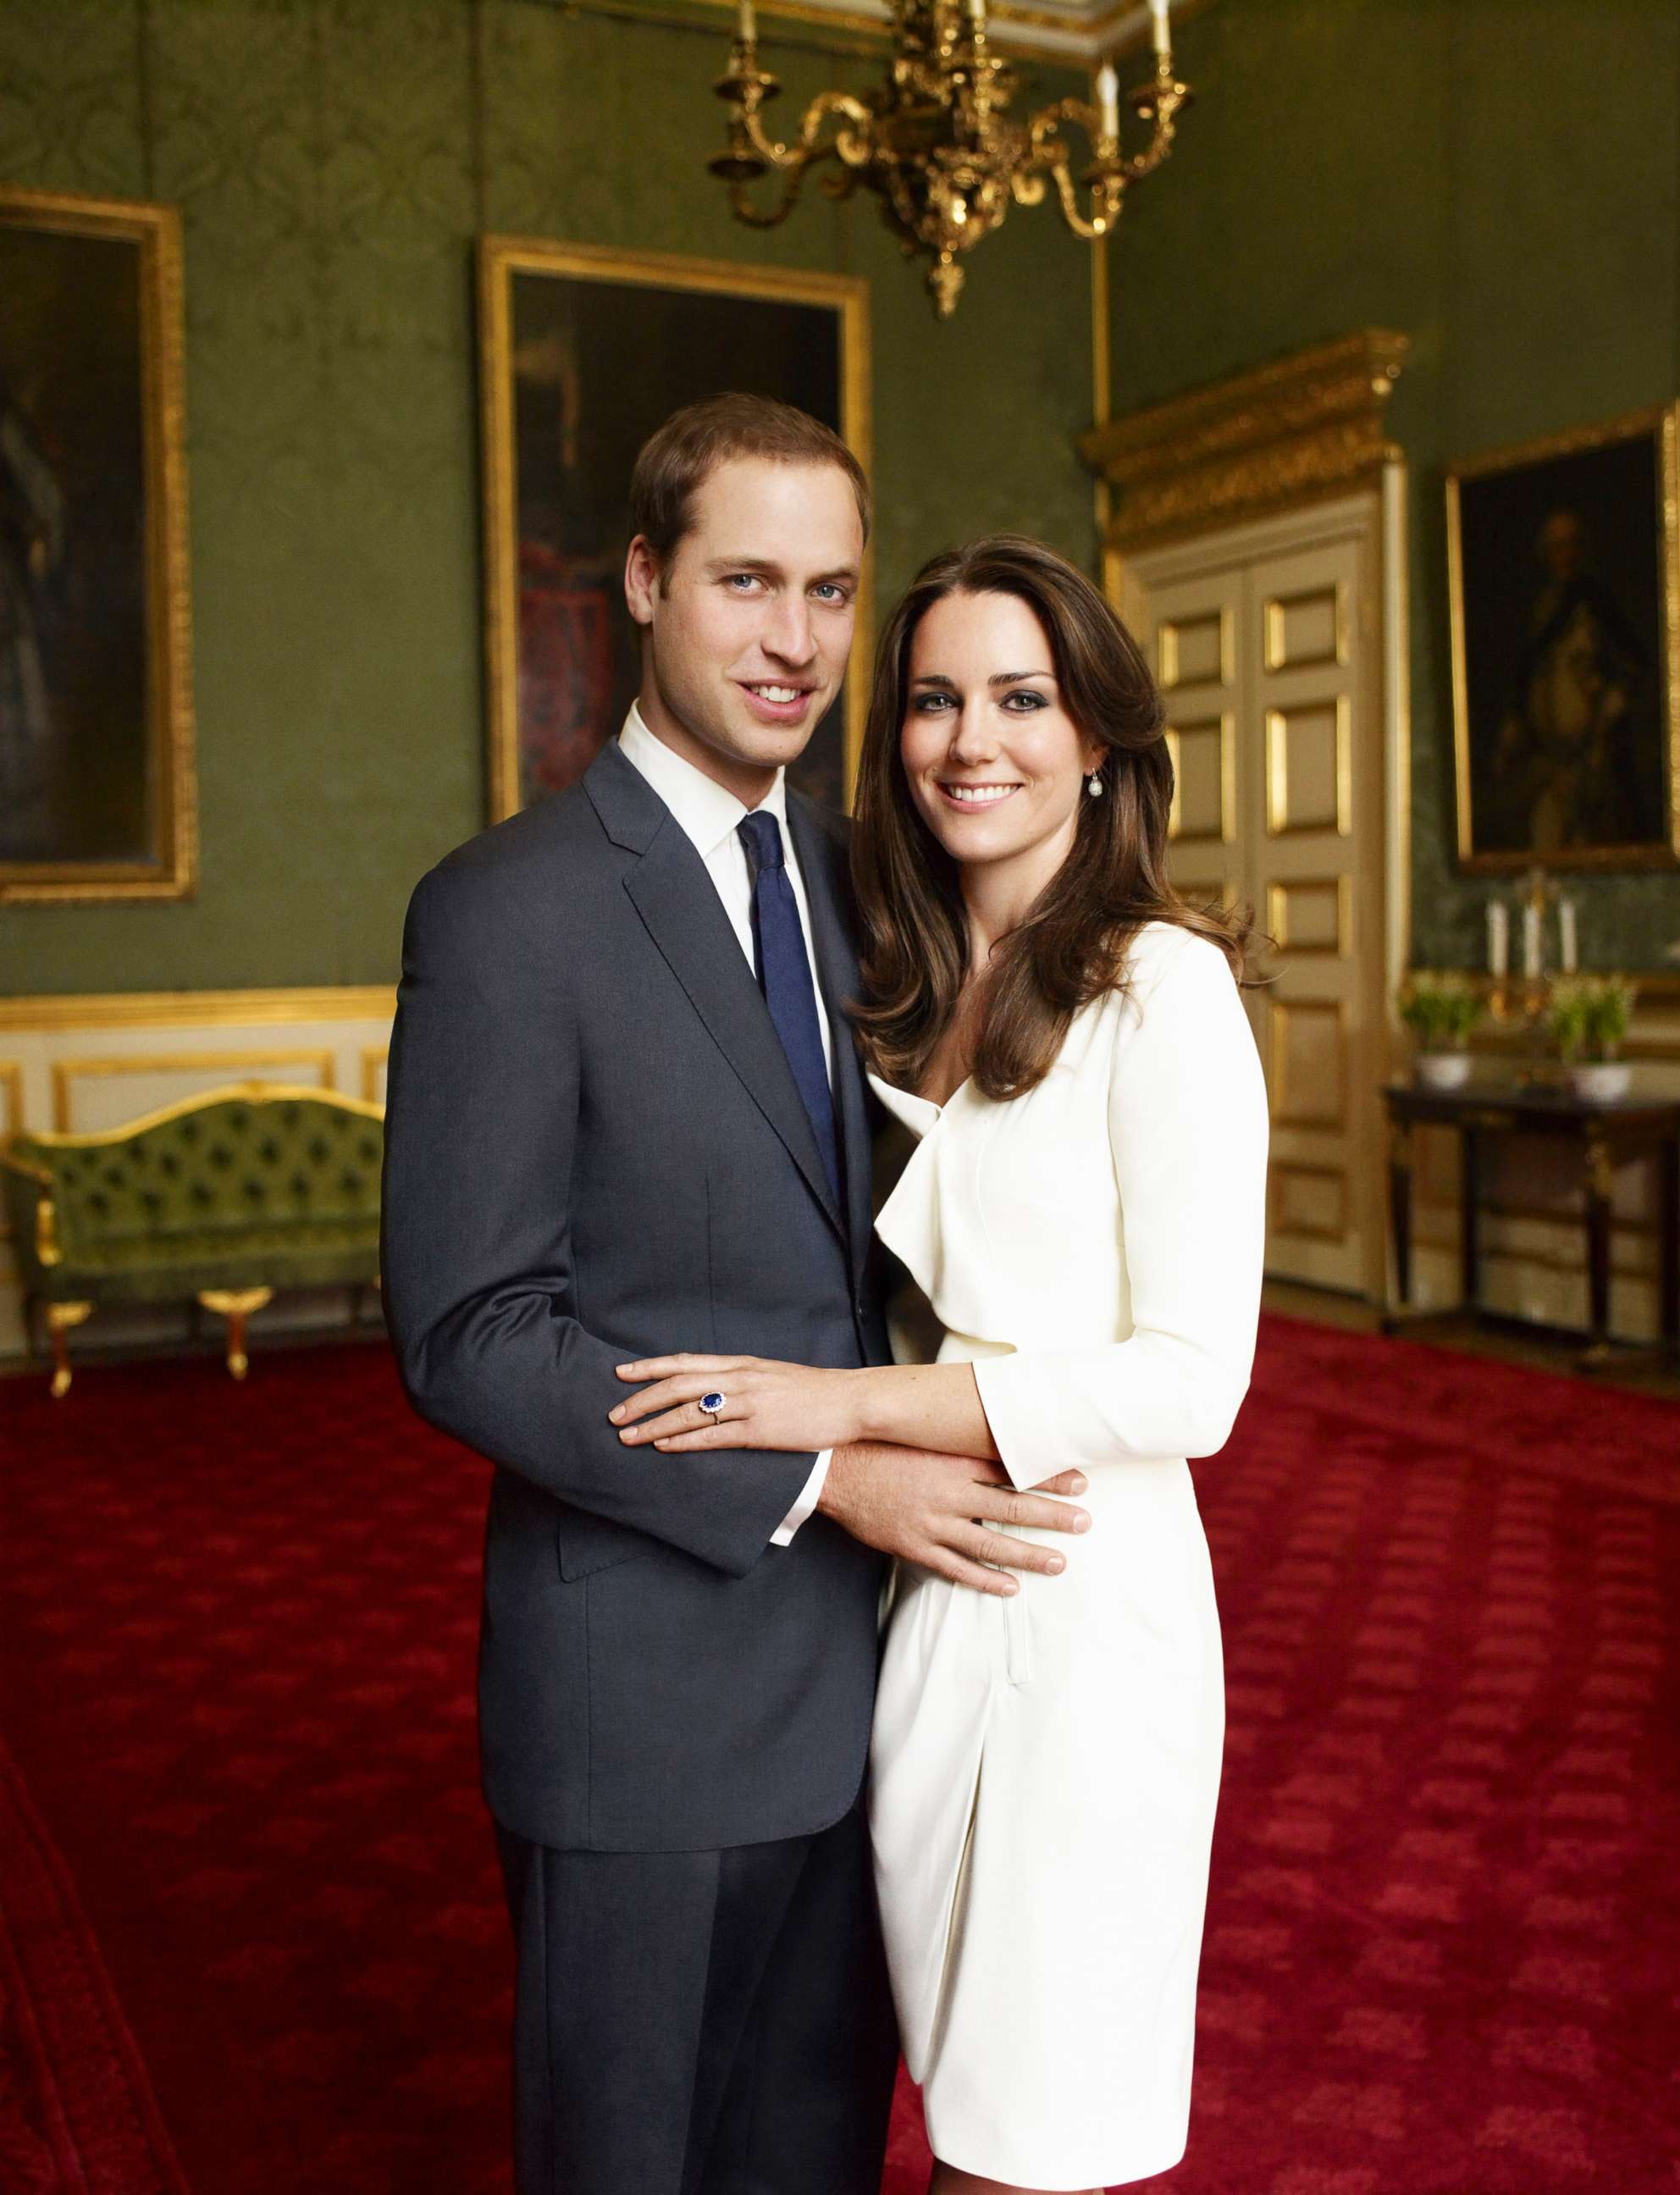 PHOTO: Prince William and Miss Catherine Middleton are pictured, Nov. 25, 2010 in the Council Chamber at St. James's Palace in London, in this official portrait that they have chosen to release to mark their engagement. 